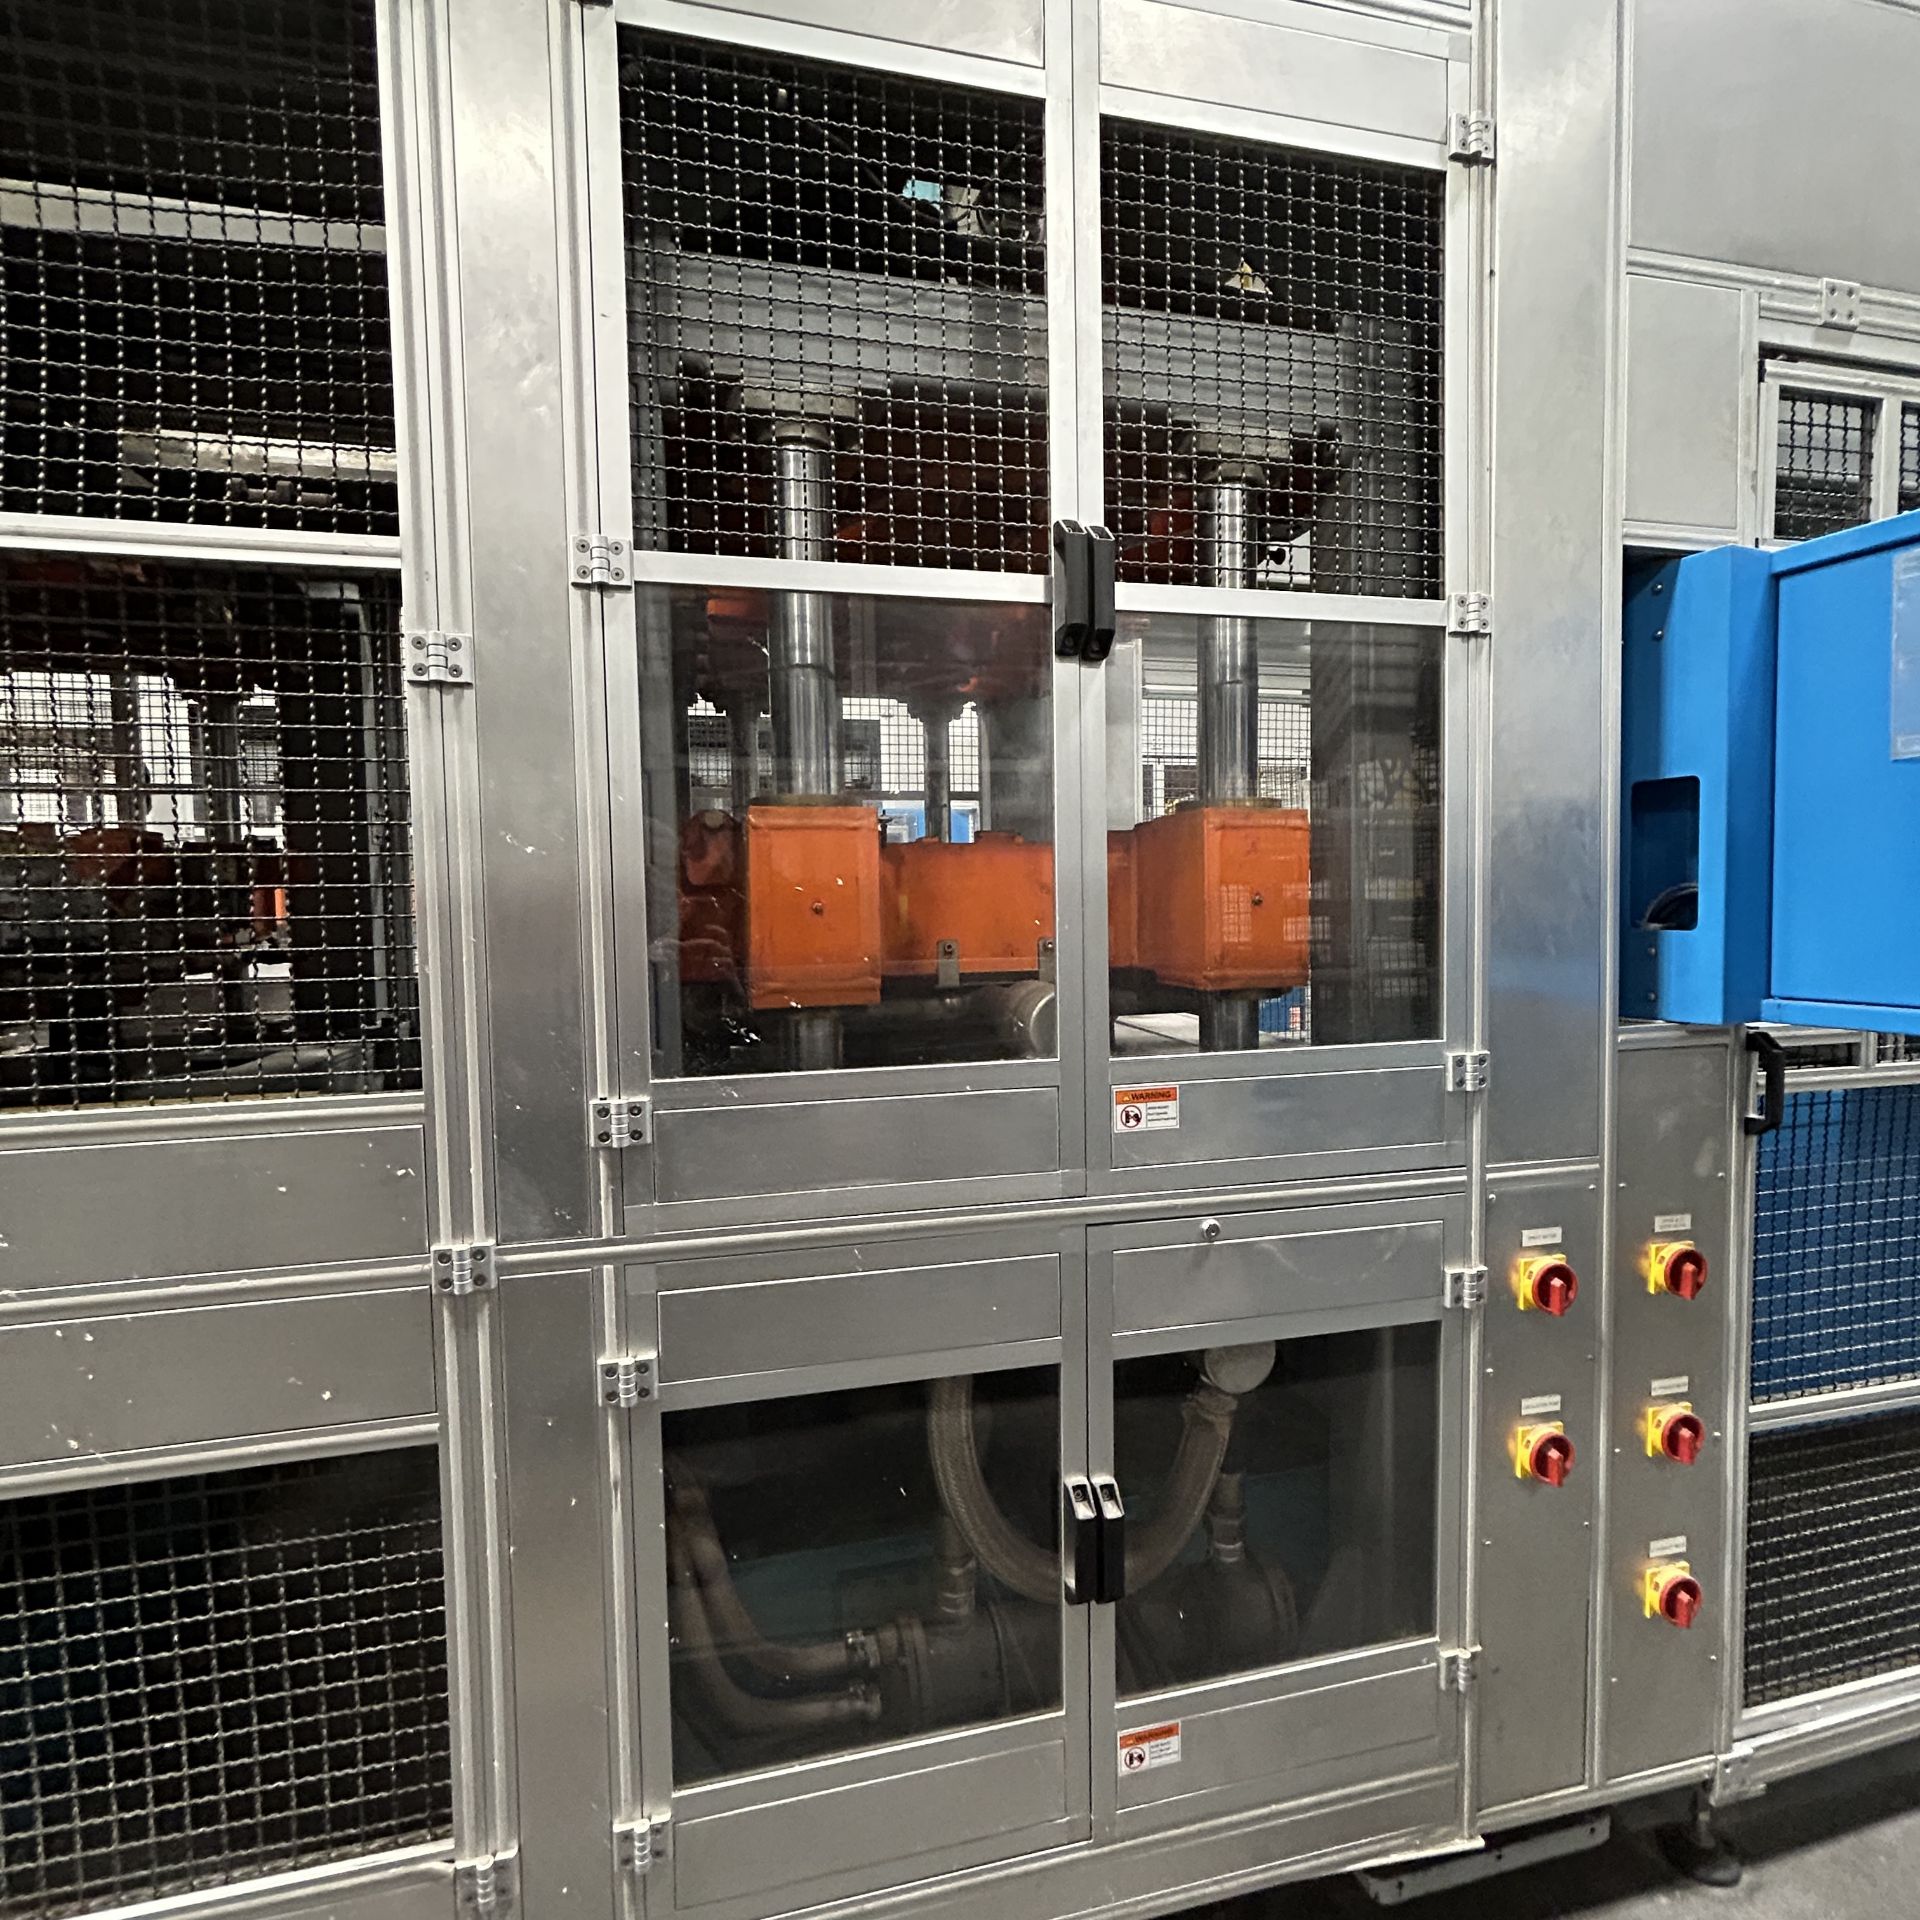 TPM-1500 3-Stage Pulp Thermoforming Machine Equipped With (1) 2018 TPM-AS-1500 2-Stage Auto Stacker - Image 7 of 35